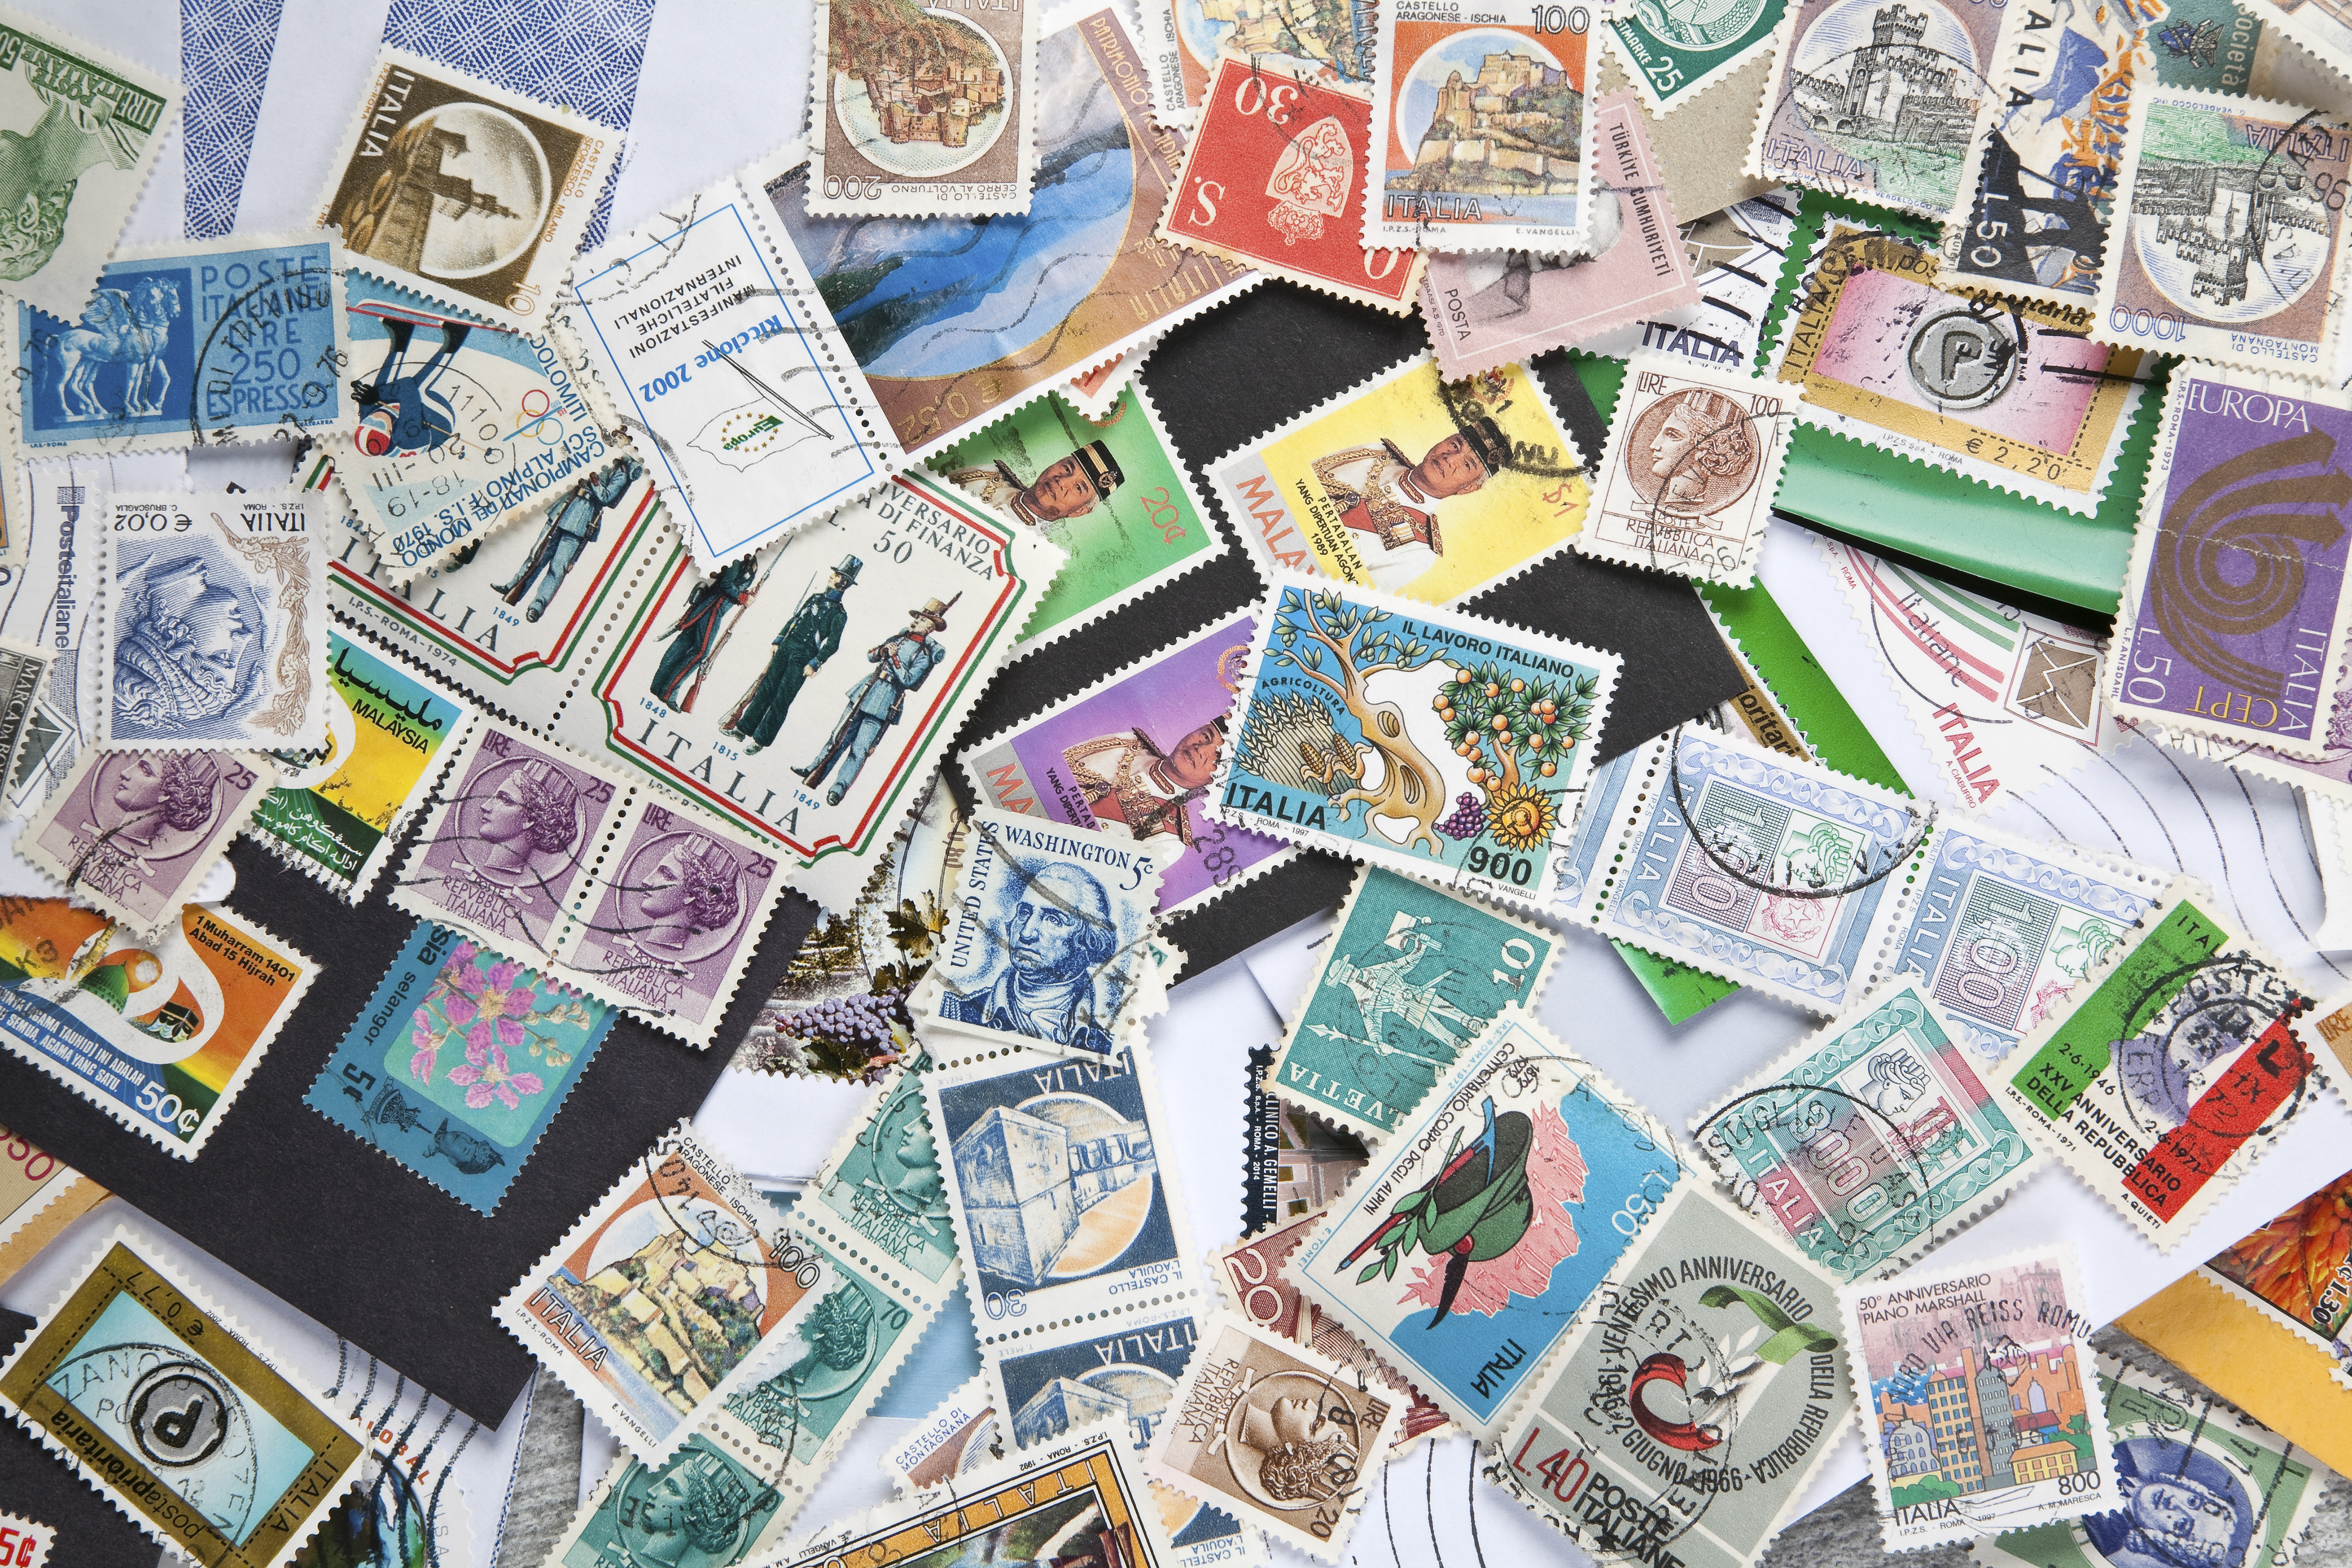 How to Buy Postage Stamps at an ATM